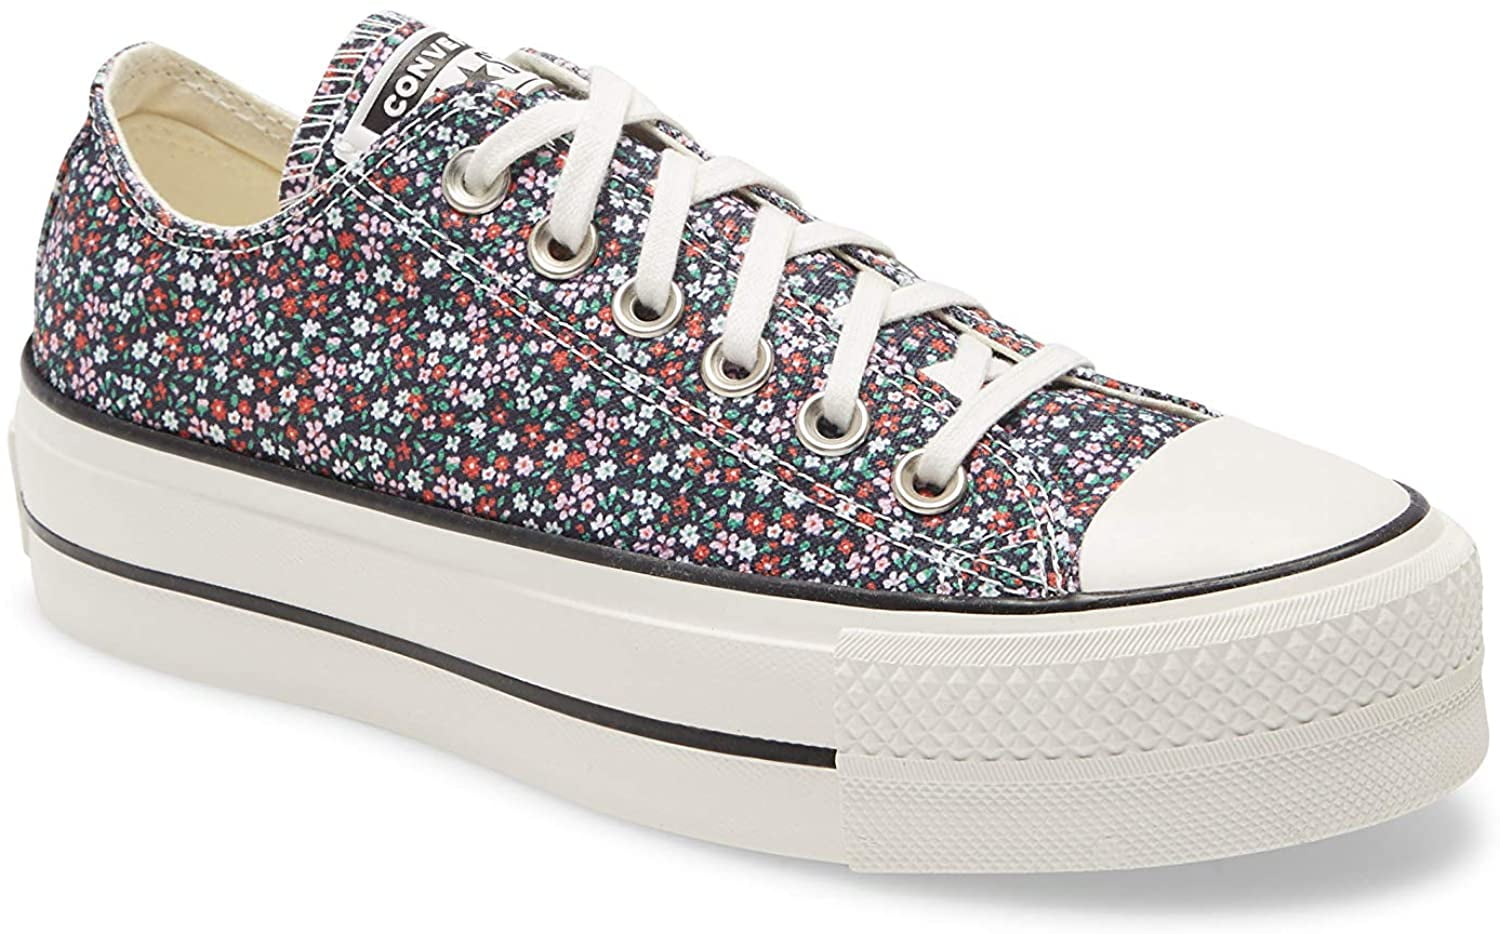 Converse Women's Lift Chuck Taylor All Star Platform Low Top Canvas  Sneakers, Green Flowers, 9 